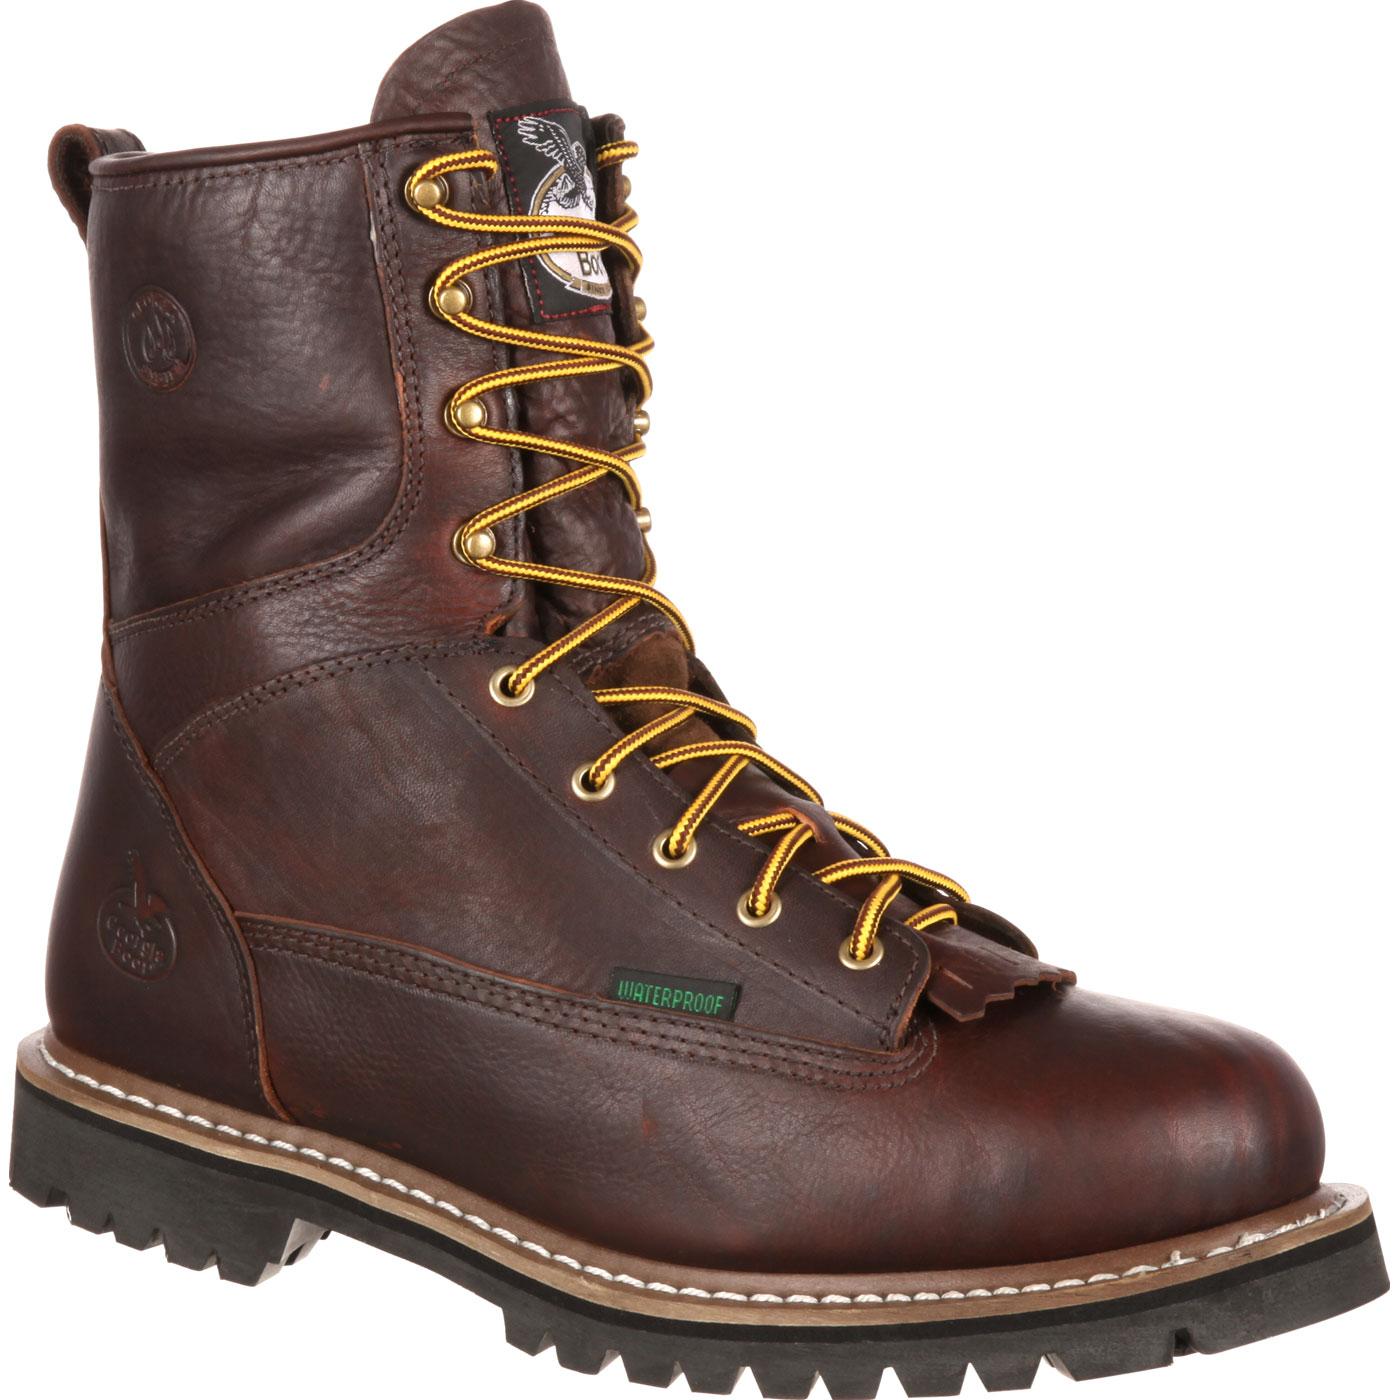 Boot Waterproof LaceToToe Work Boot, style G101